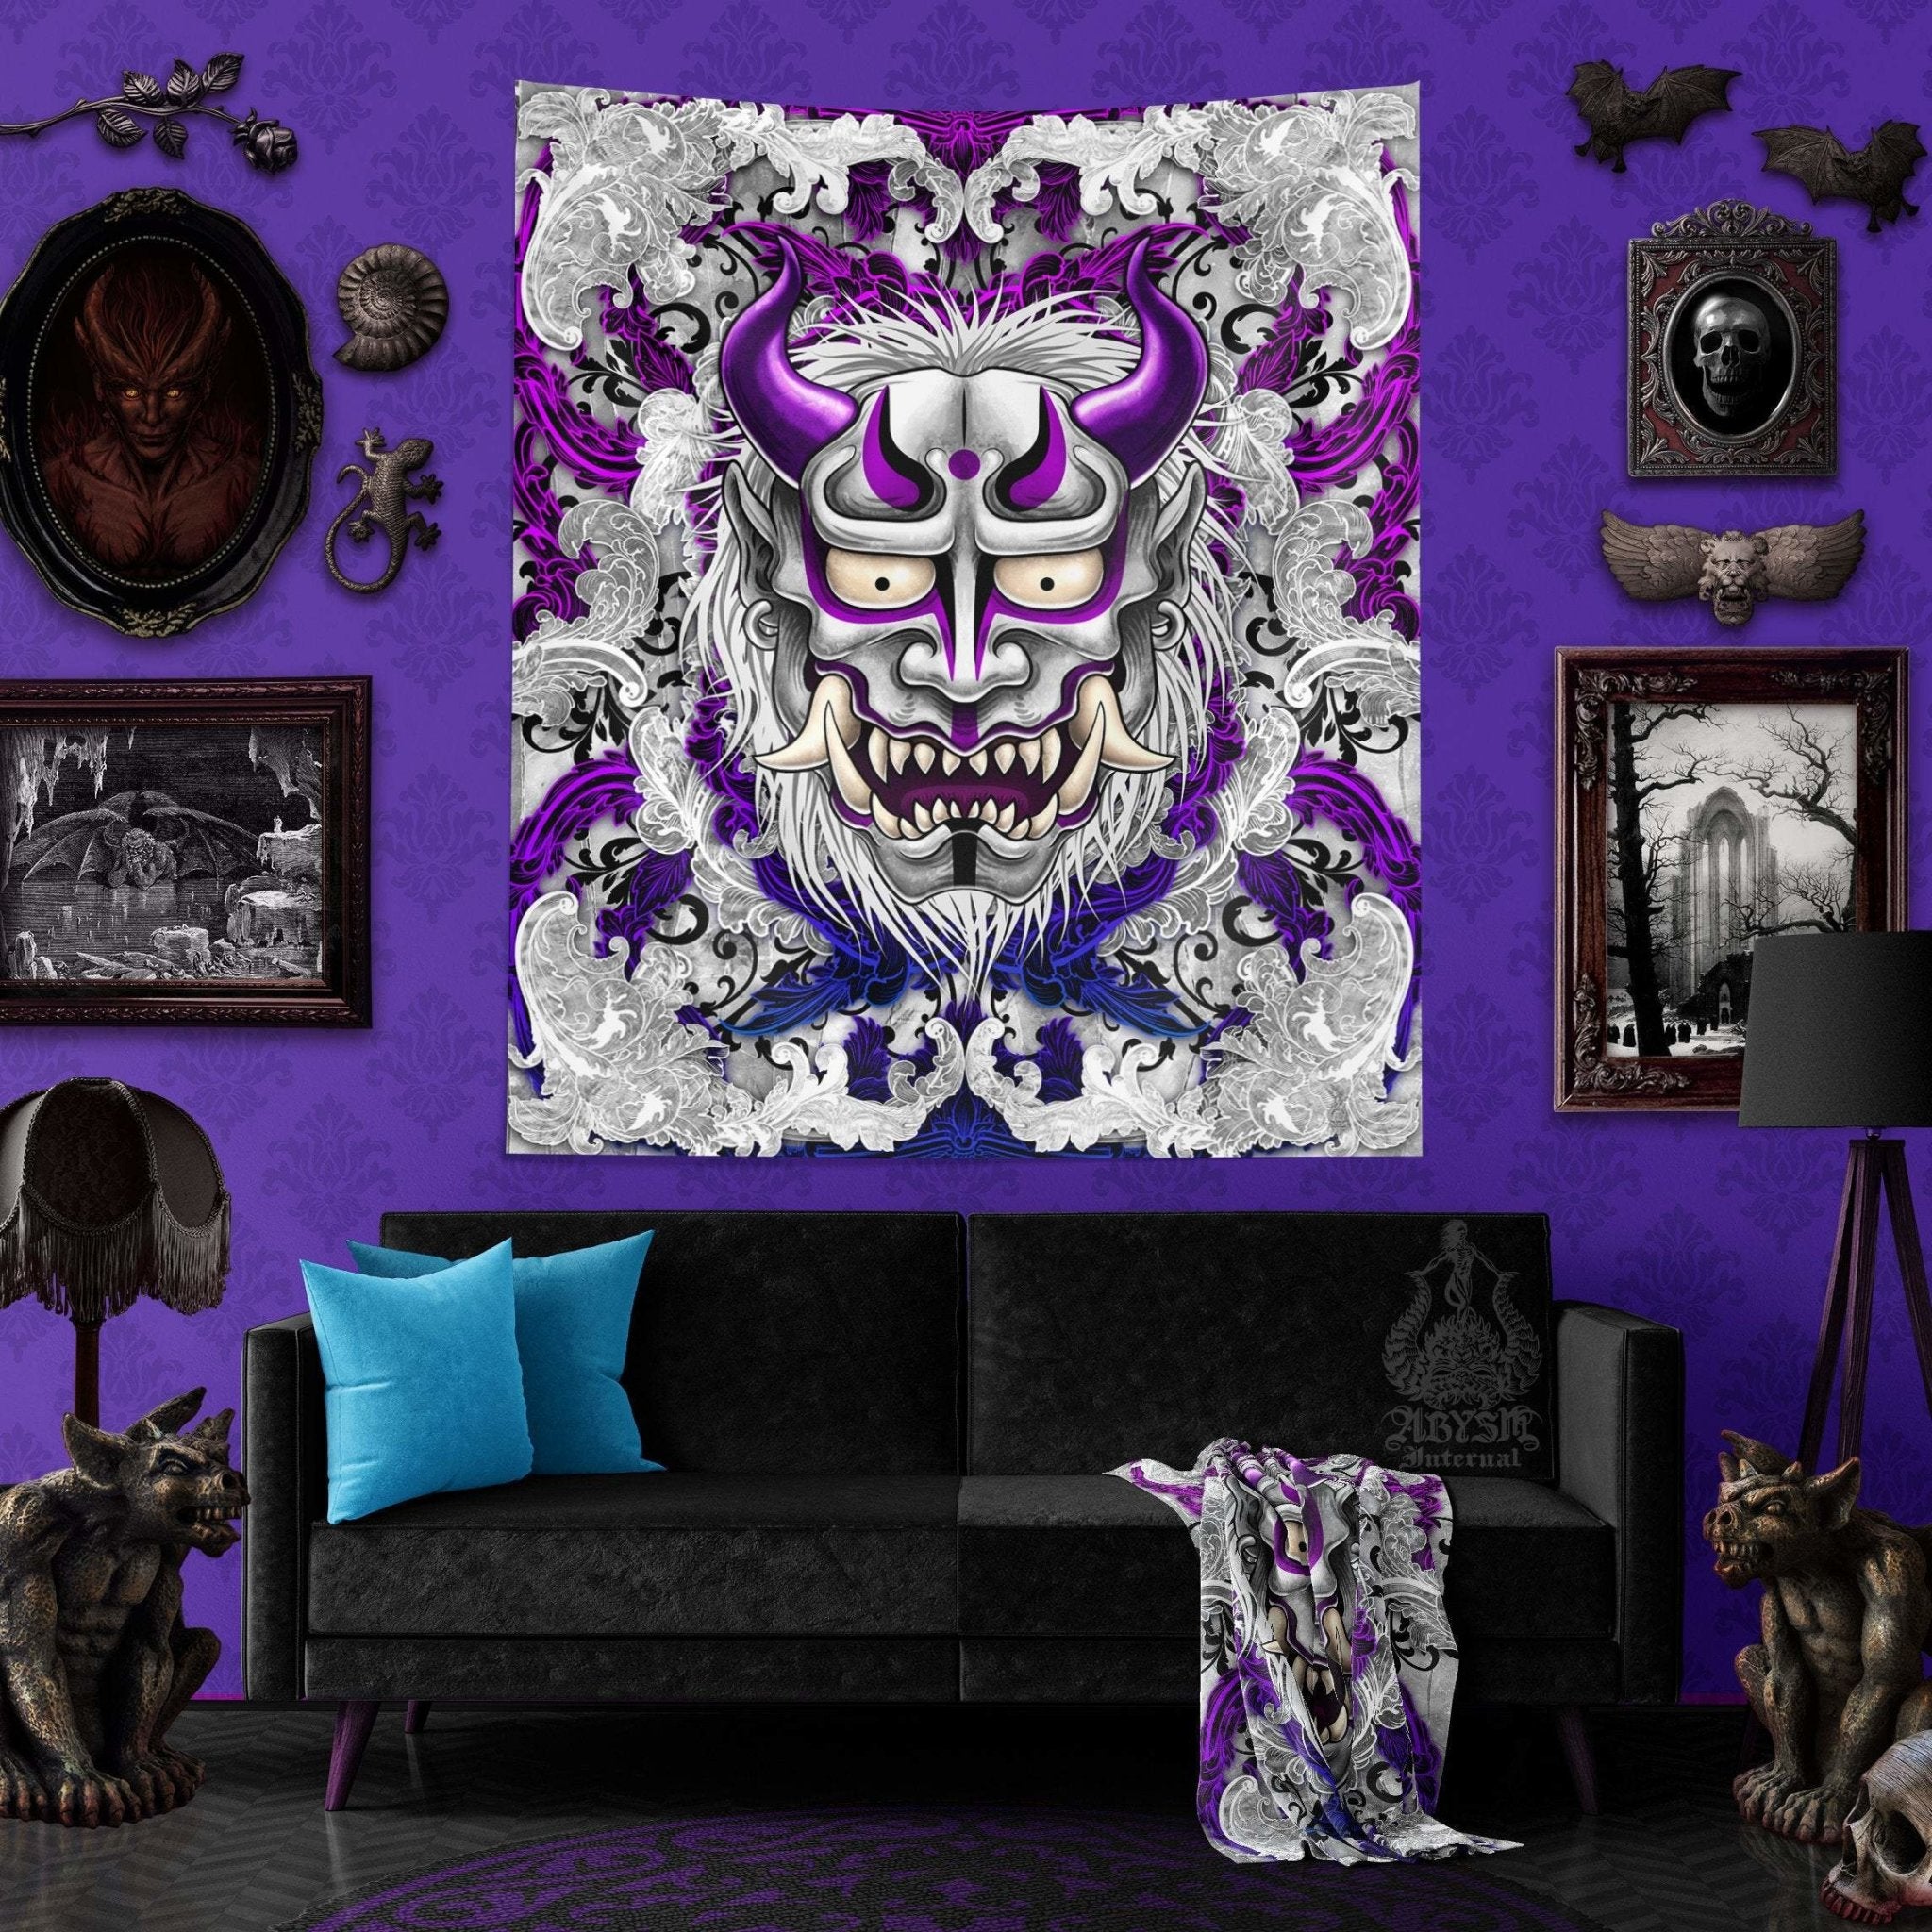 Pastel Goth Tapestry, Trippy Wall Hanging, Japanese Demon, Anime and Gamer Home Decor, Art Print - Purple & White Oni - Abysm Internal